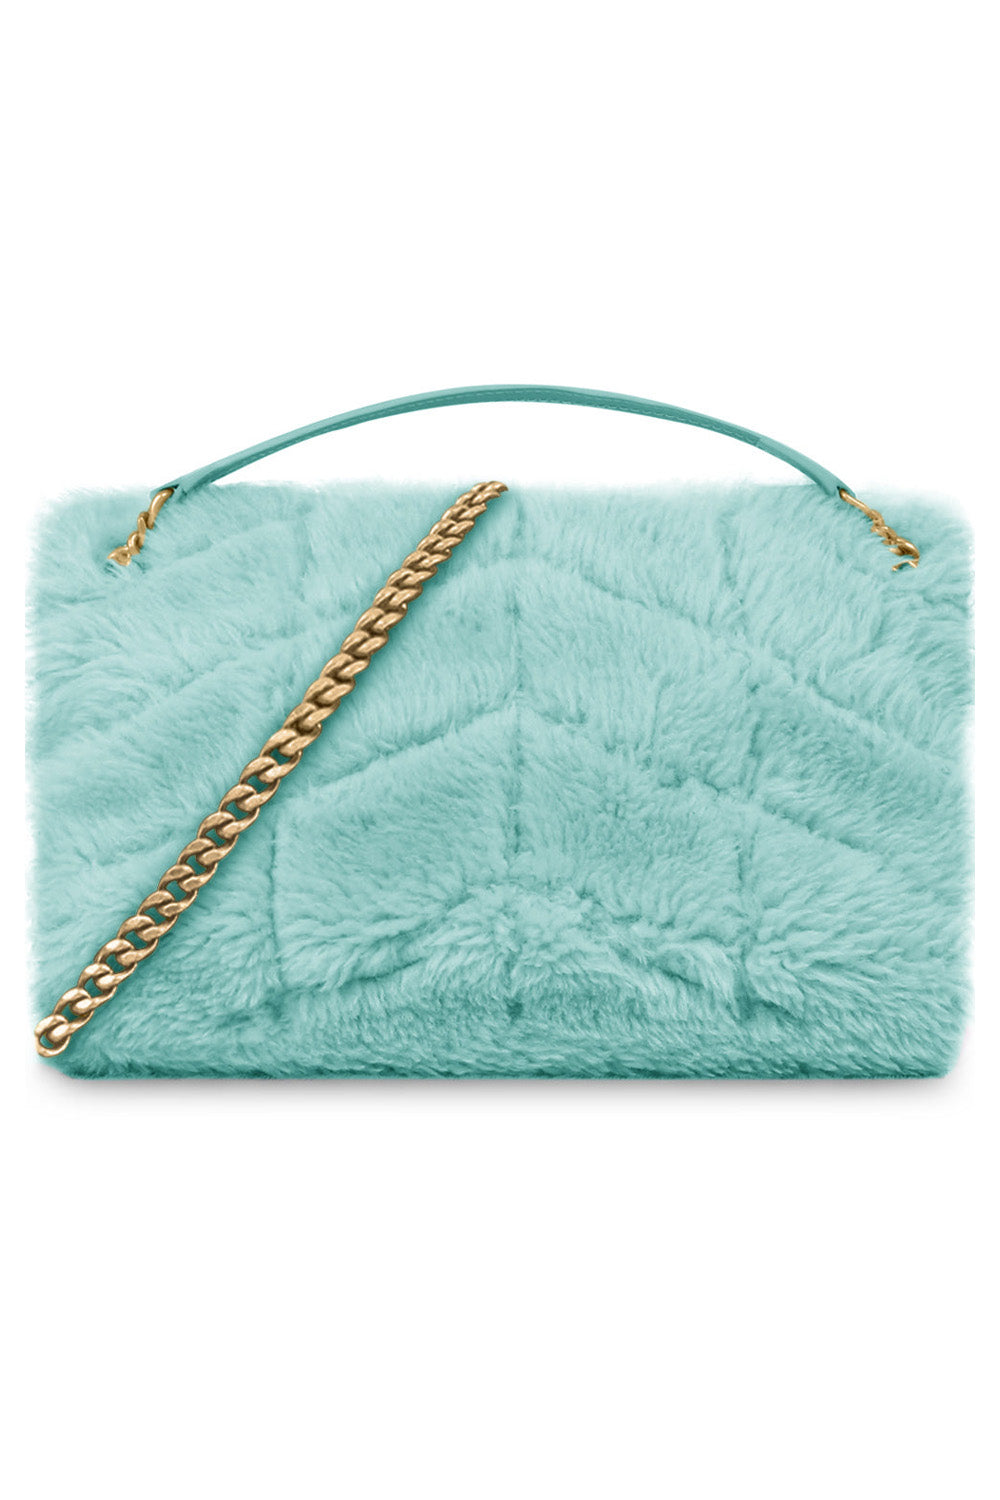 SAINT LAURENT BAGS GREEN LOULOU SMALL SHEARLING PUFFER BAG | ICED MINT